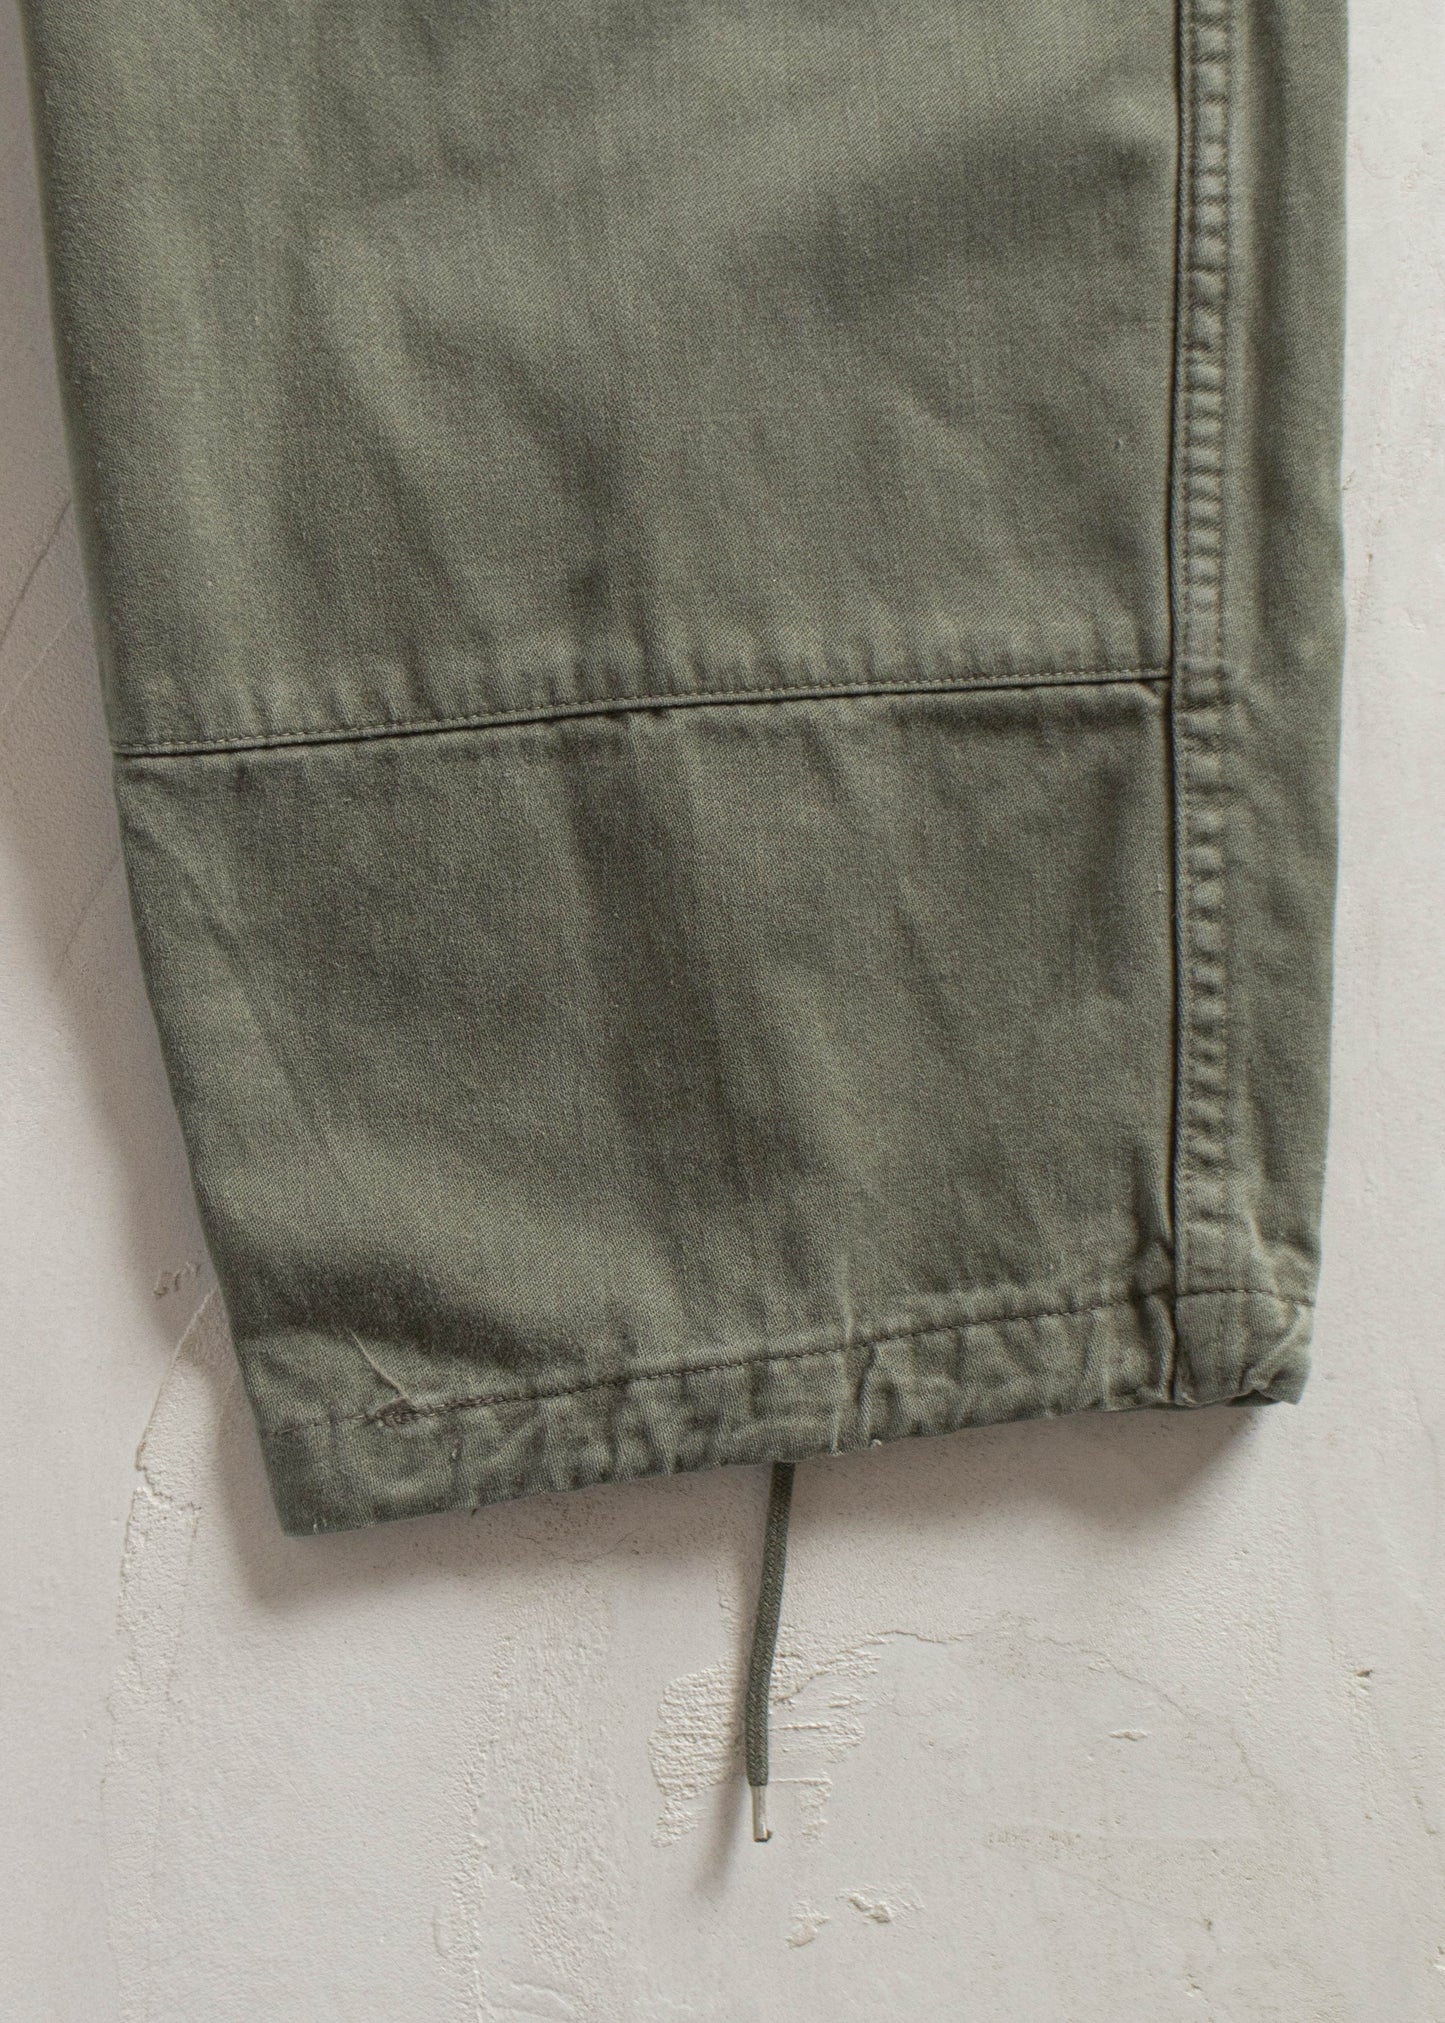 Vintage 1980s French Military Cargo Pants Size Women's 28 Men's 31